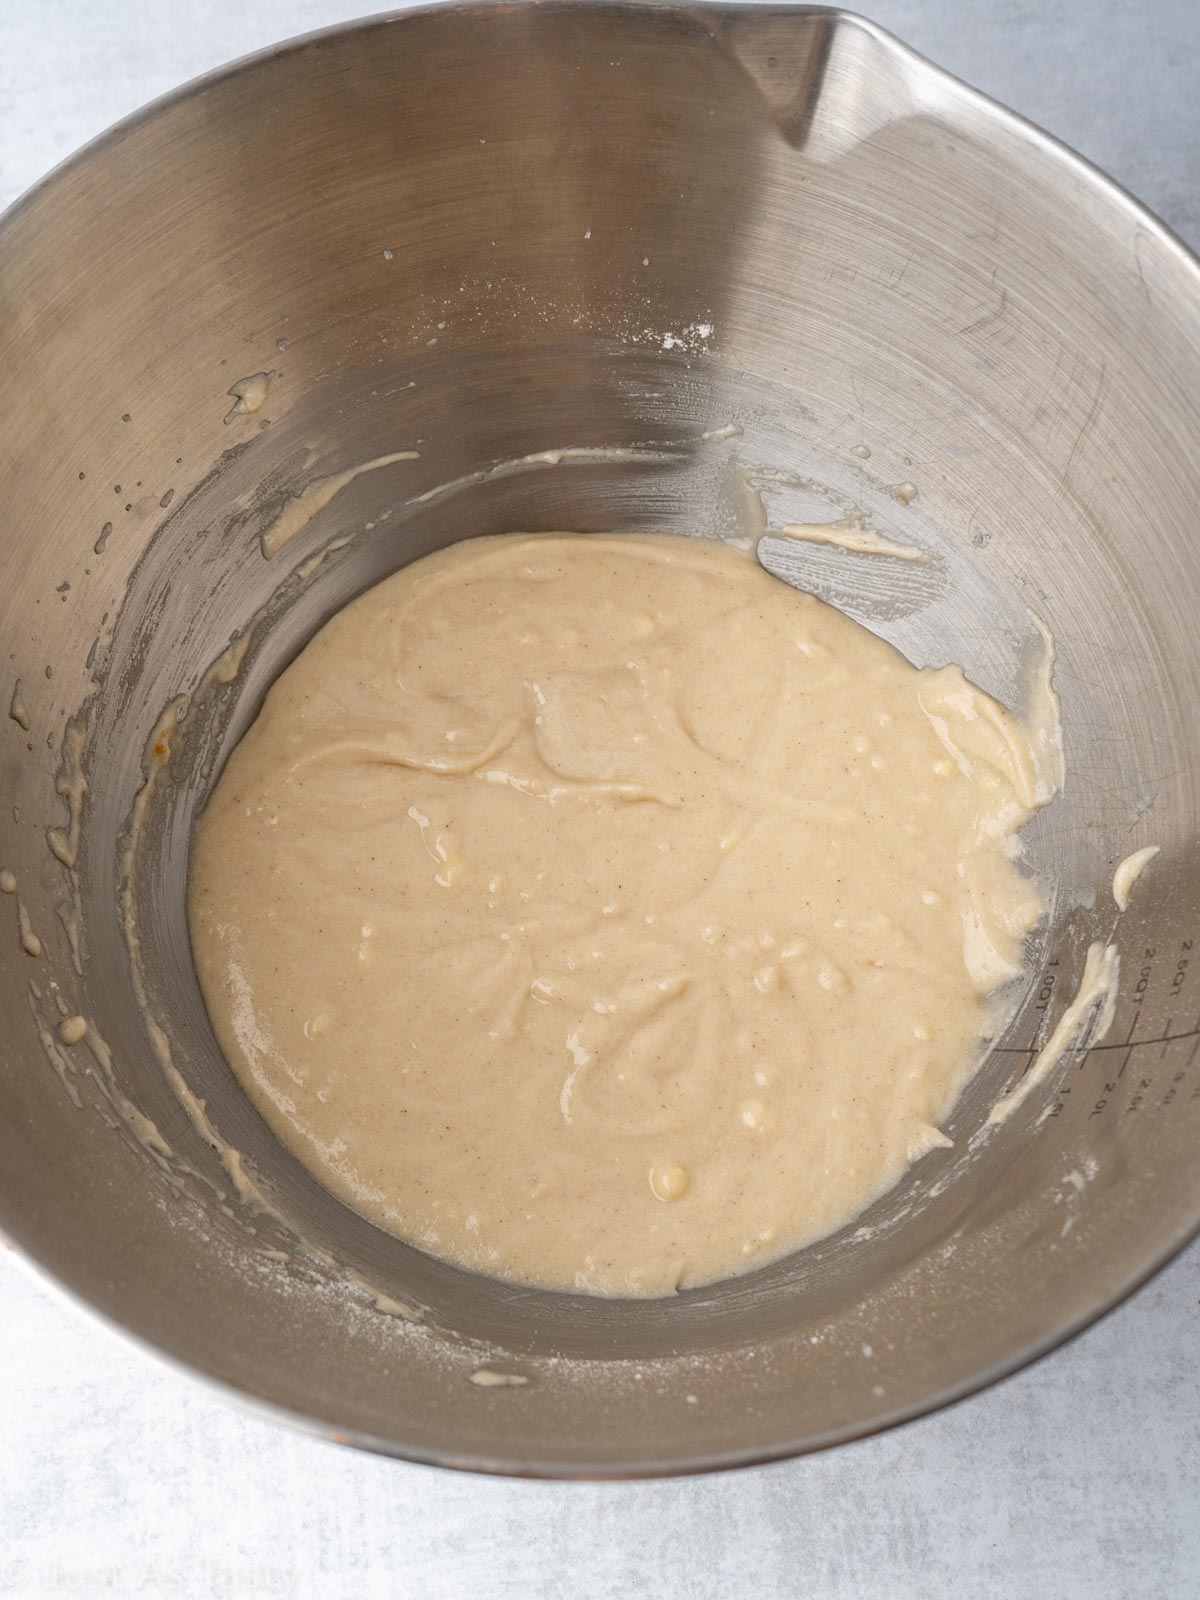 Cupcake batter in a bowl.